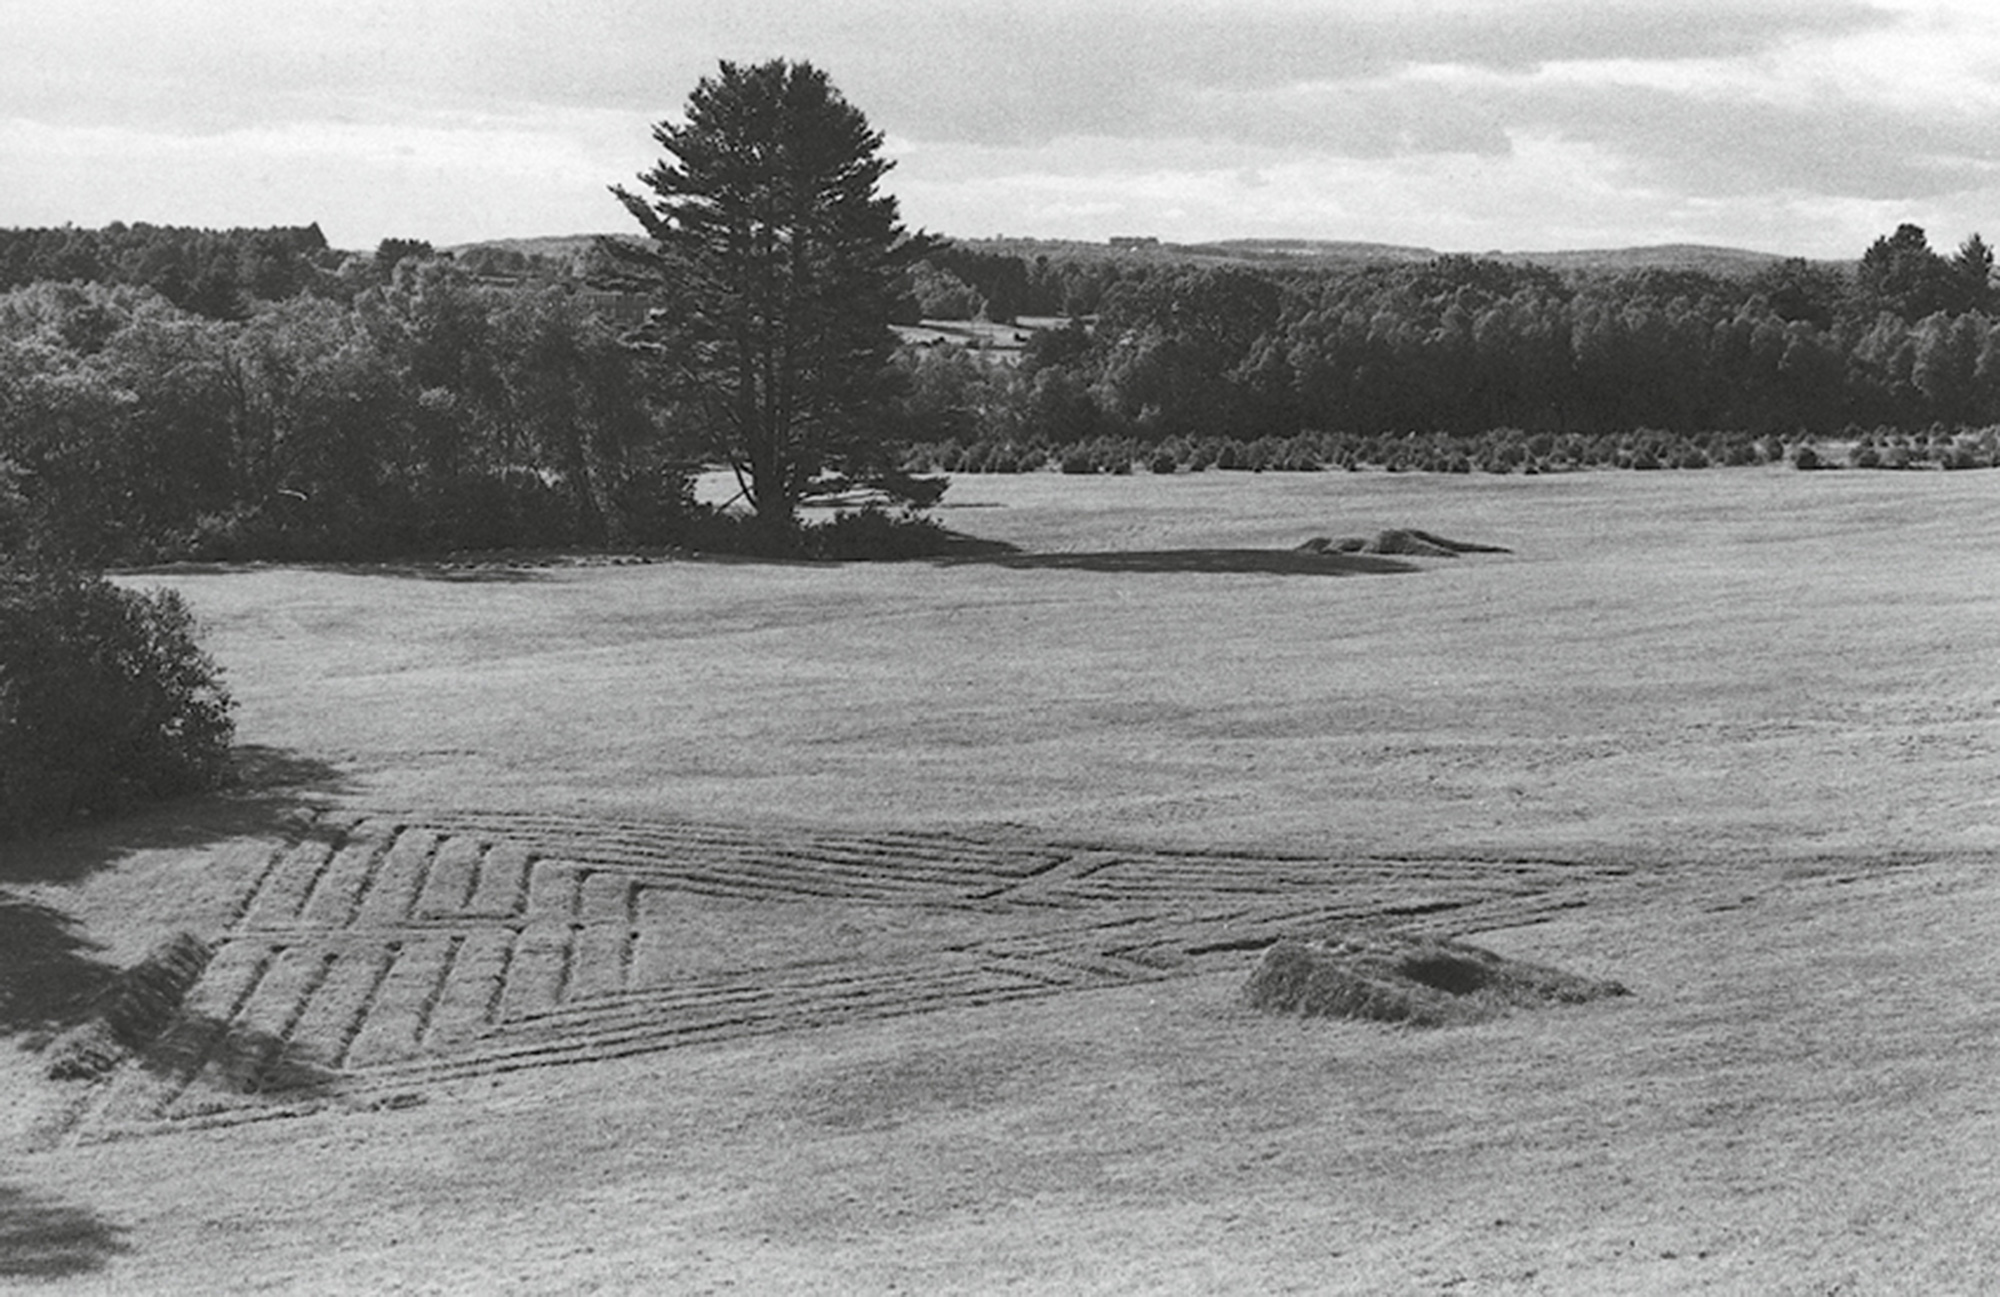 Overview of Pratt Farm, with Turf Maze and Observatory (both ca. 1974) in the foreground.